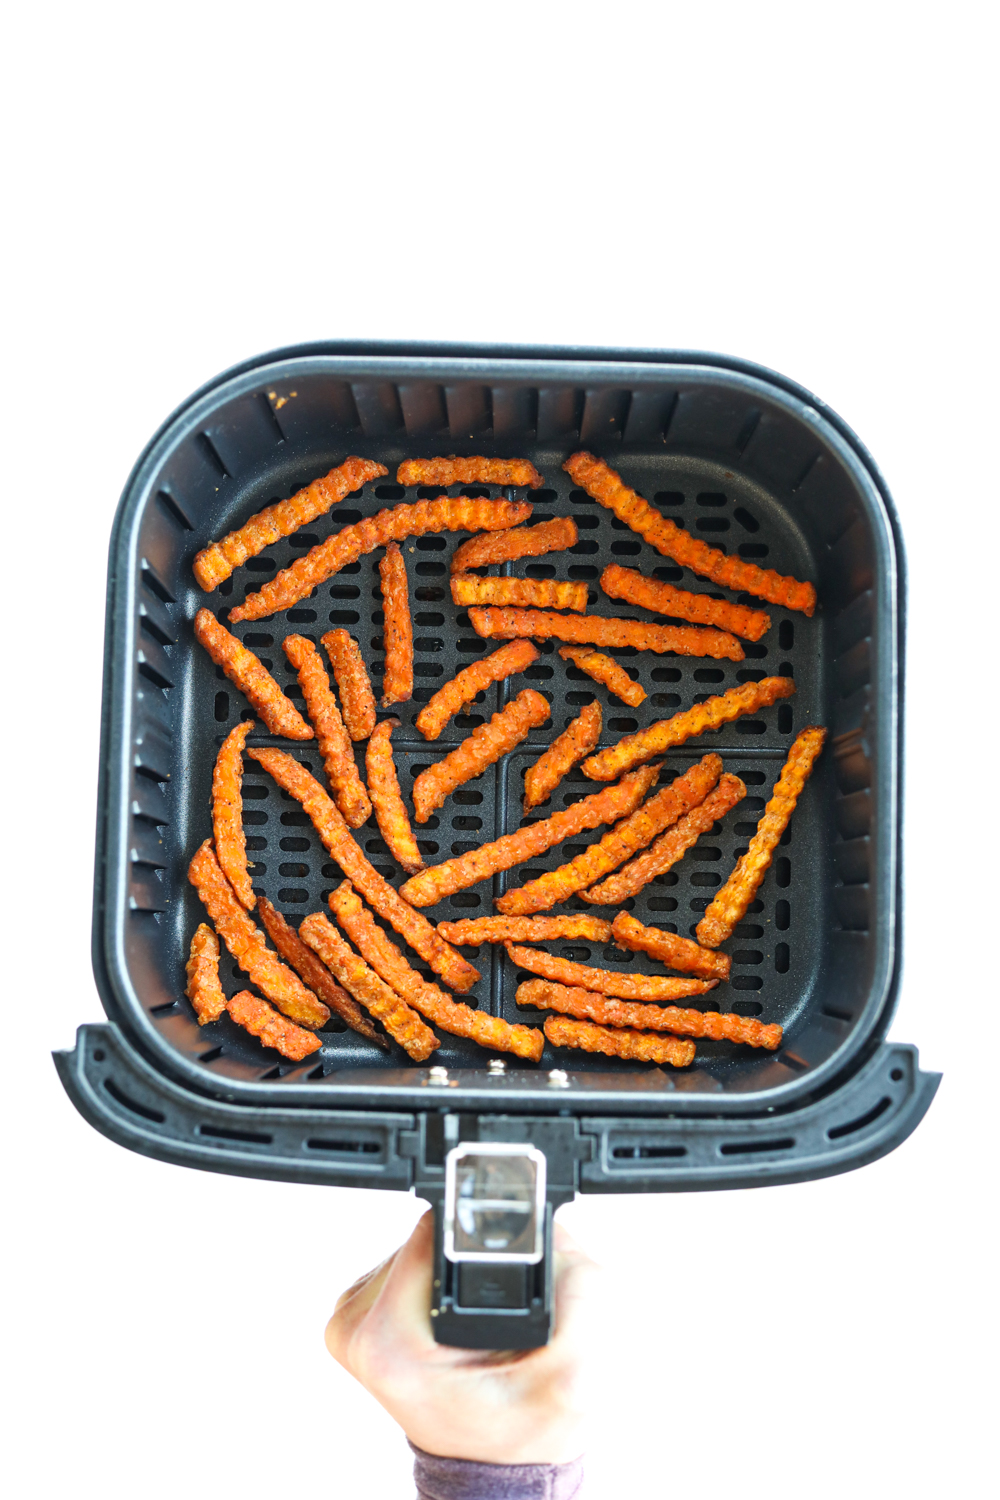 Hand holding an air fryer with crispy sweet potato fries in the air fryer basket.